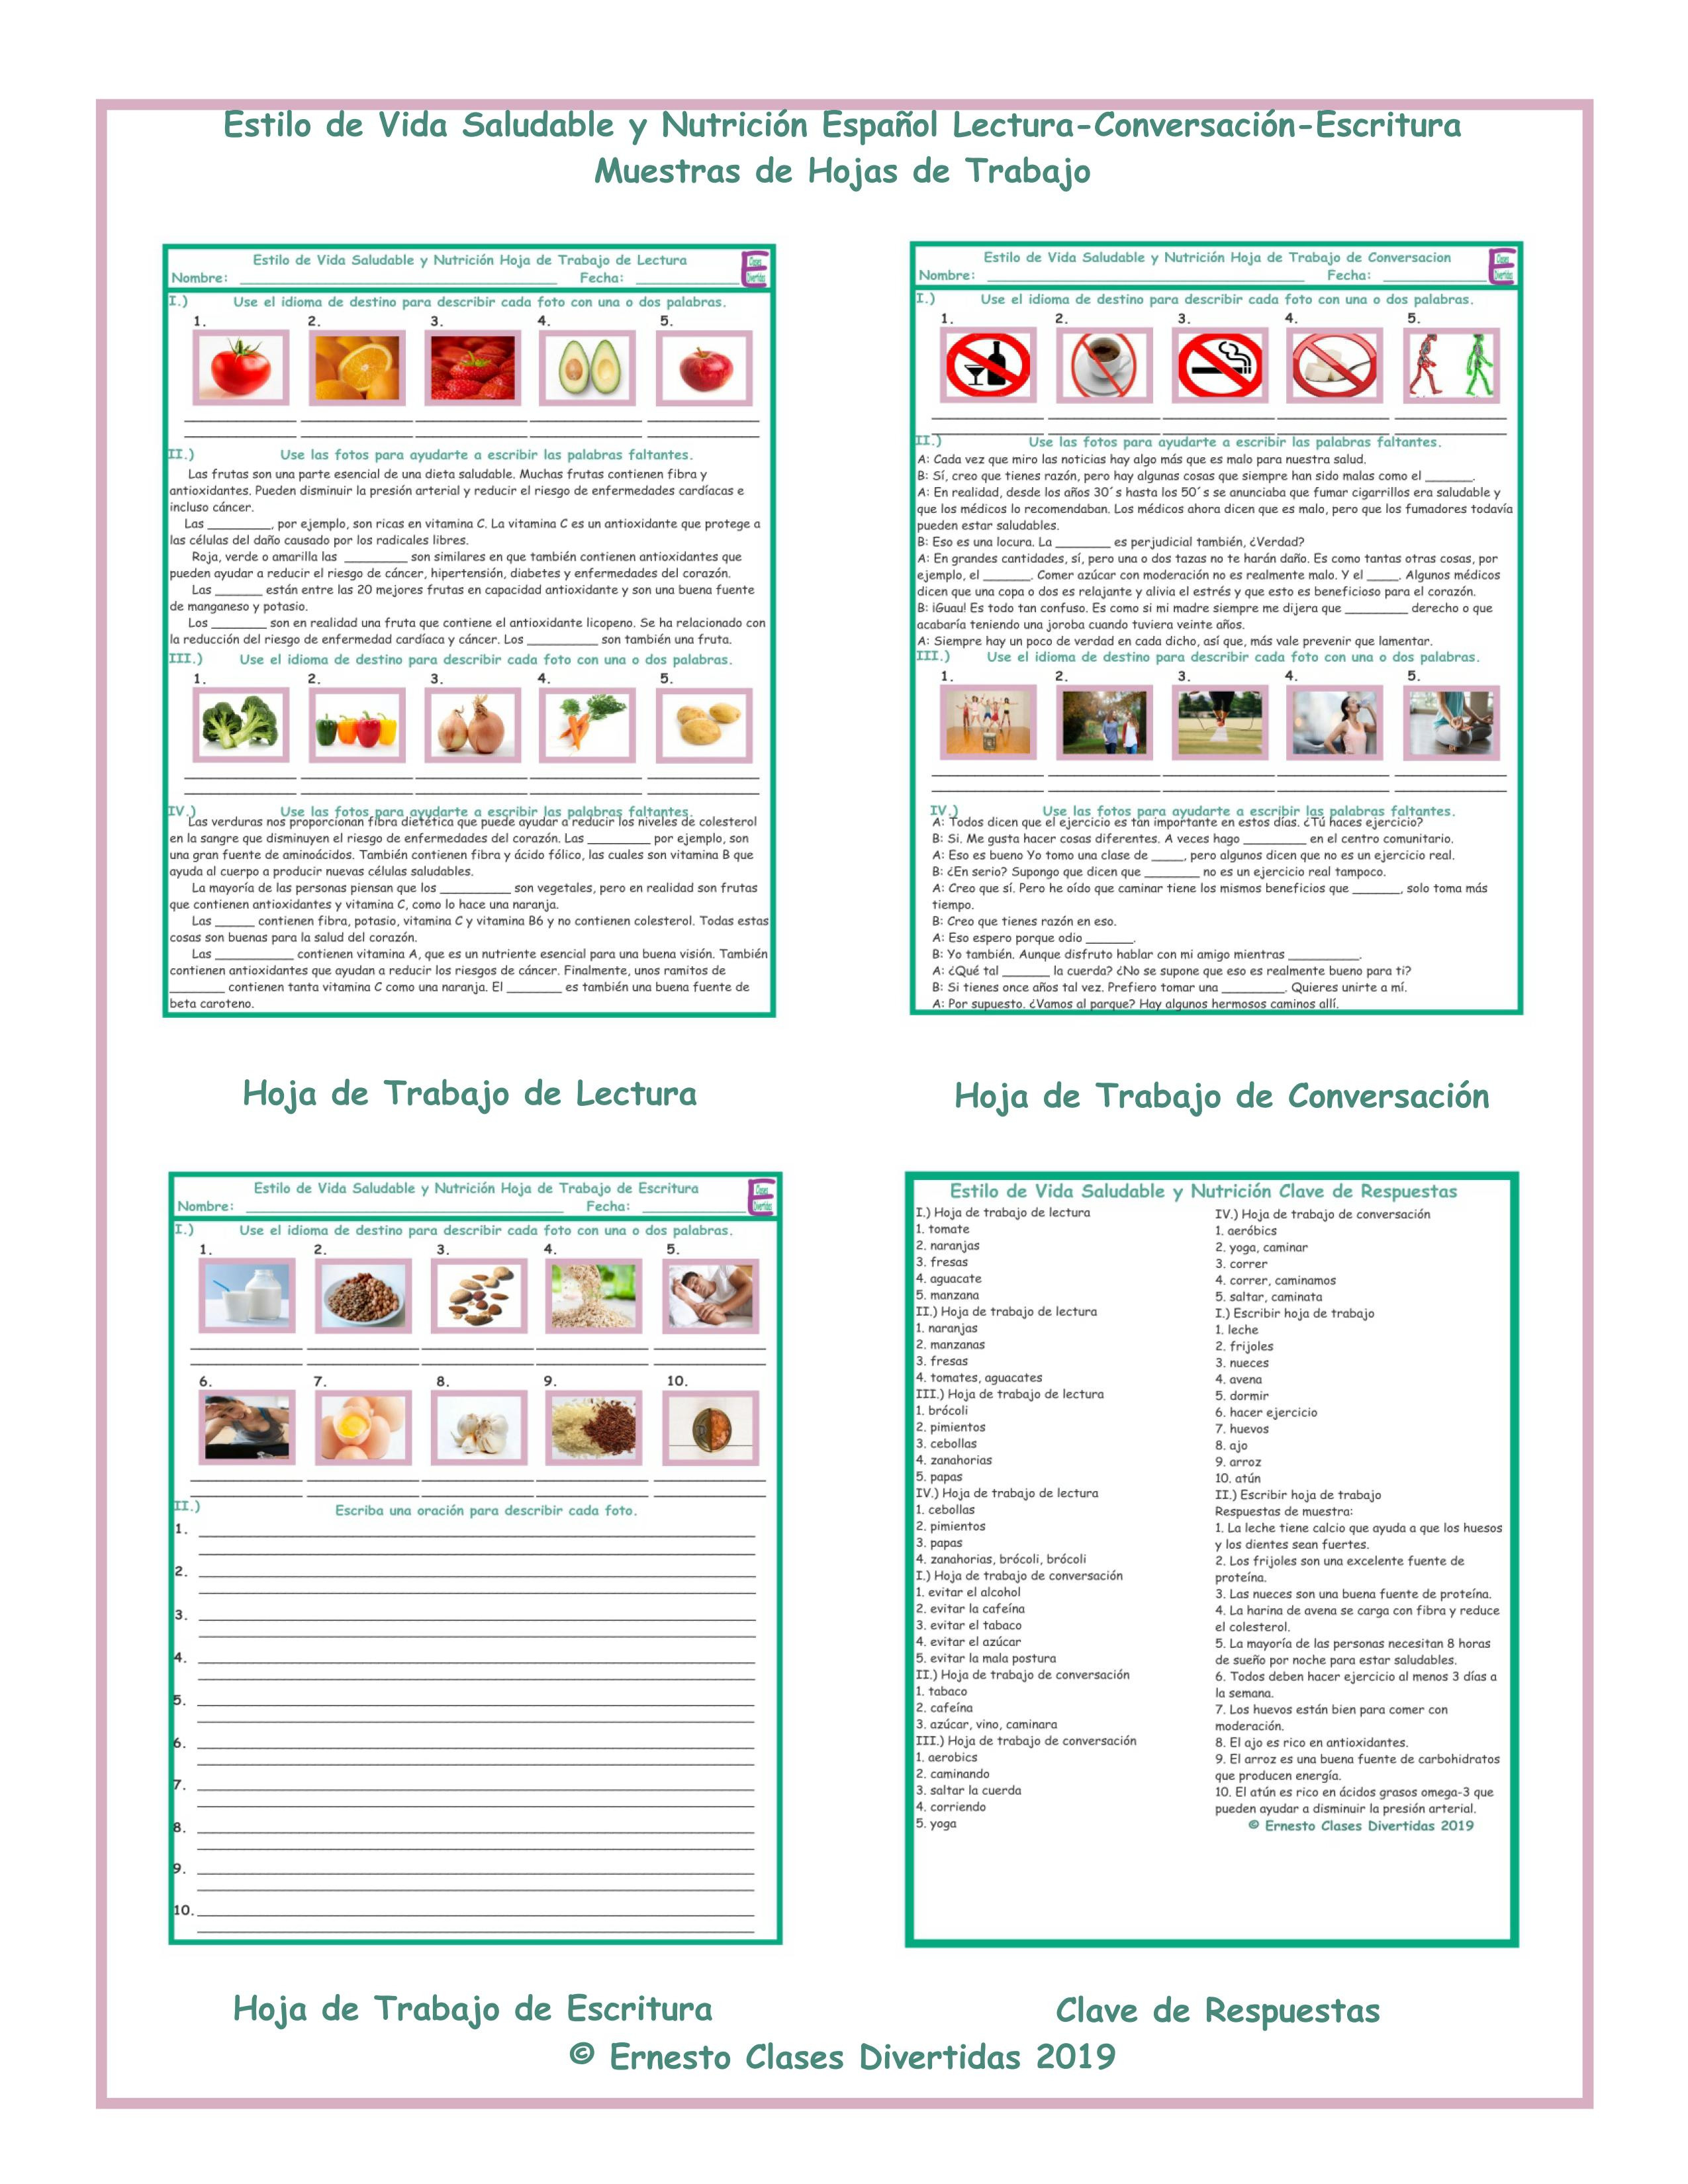 Healthy Lifestyle And Nutrition Spanish Readinonversationwriting  Worksheets